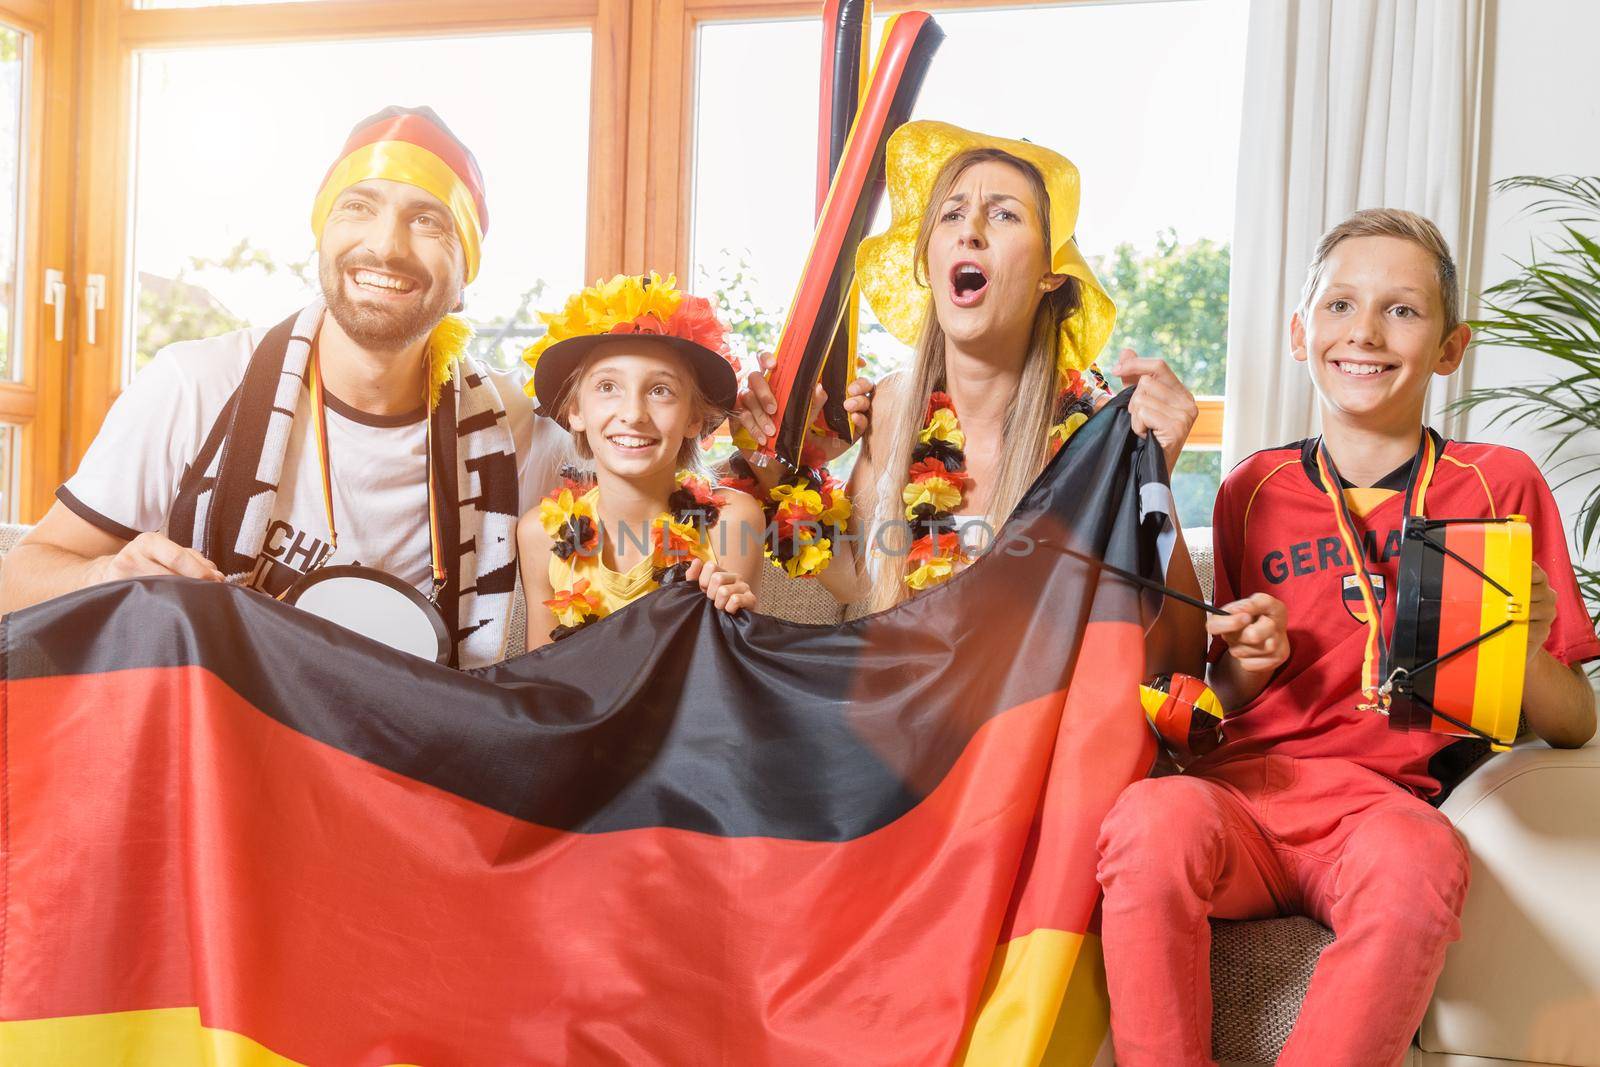 Whole family cheering for the German soccer team in front of TV by Kzenon